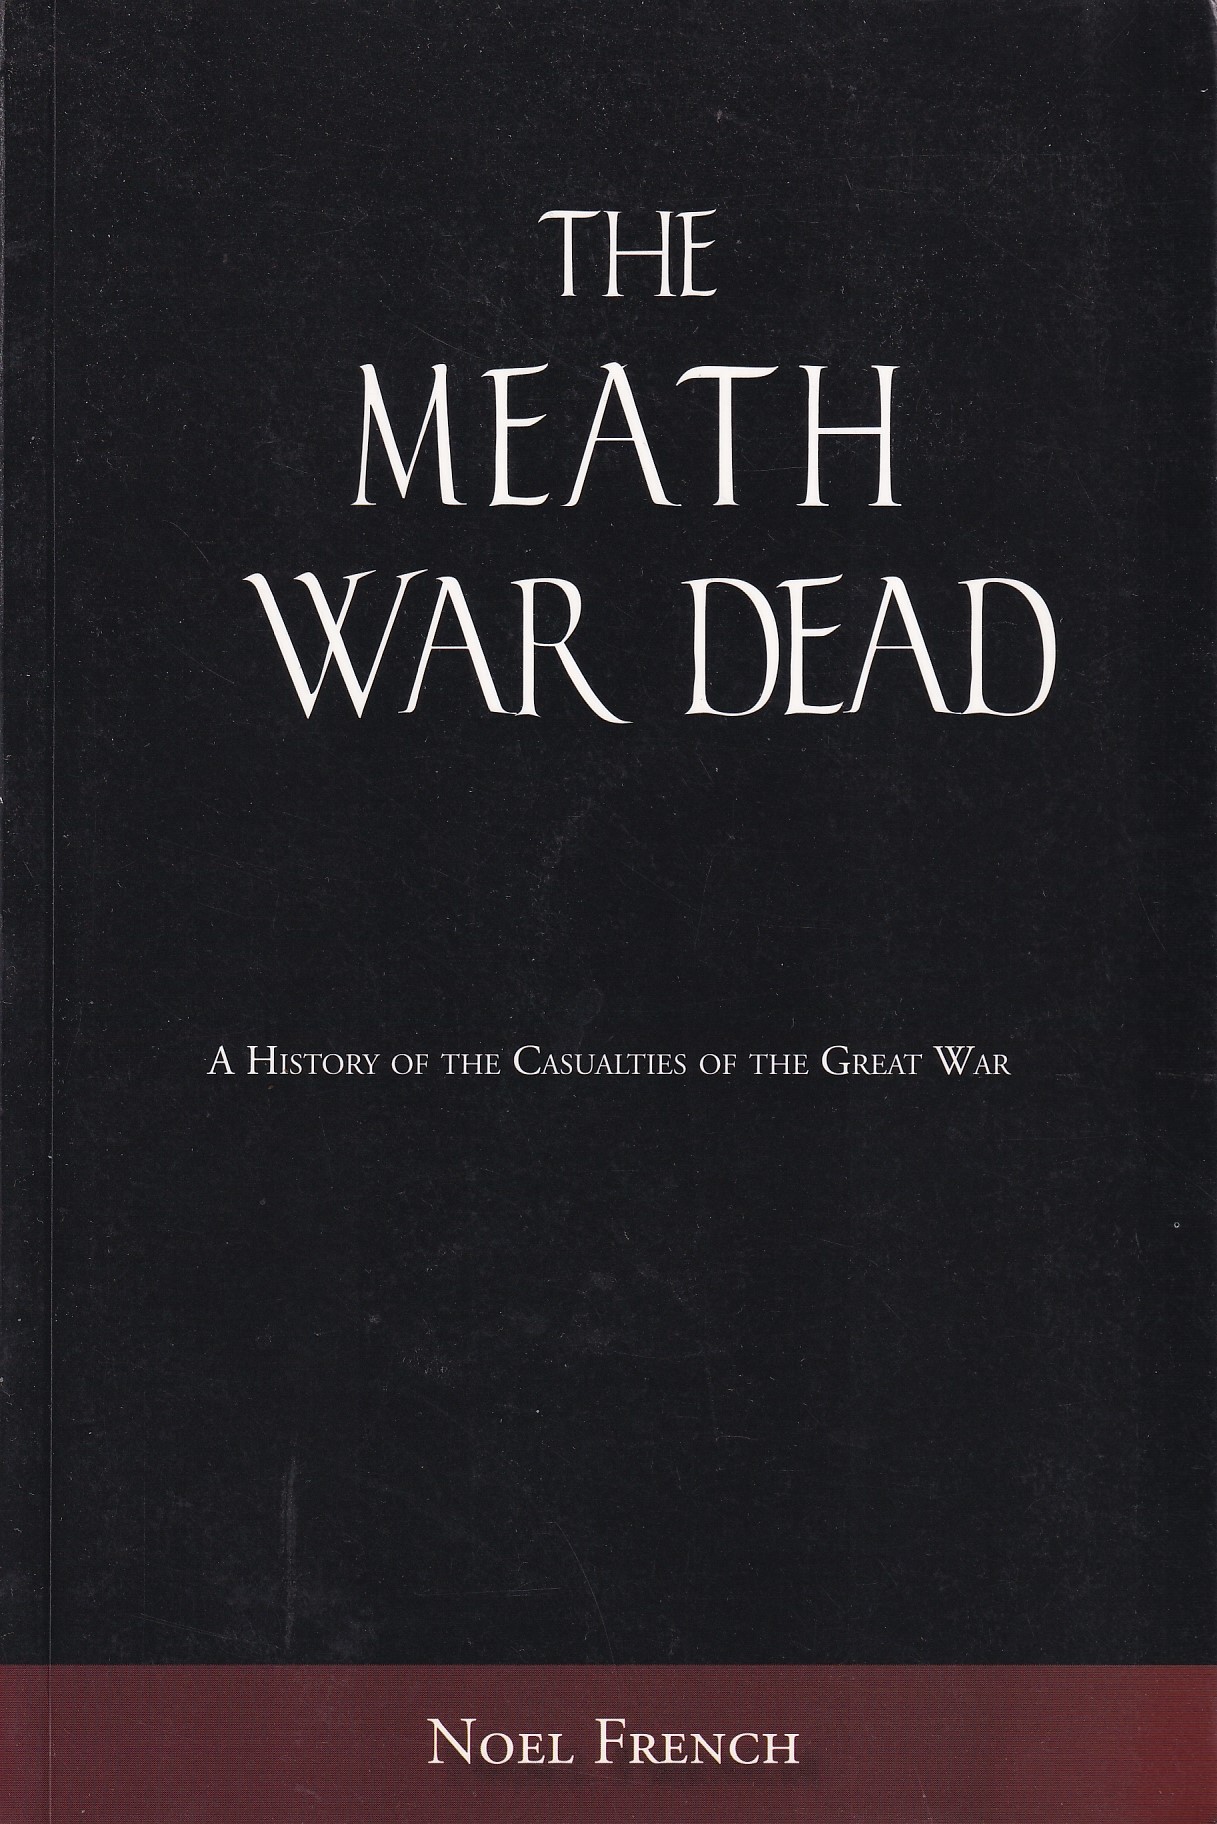 The Meath War Dead: A History of the Casualties of the Great War | Noel French | Charlie Byrne's